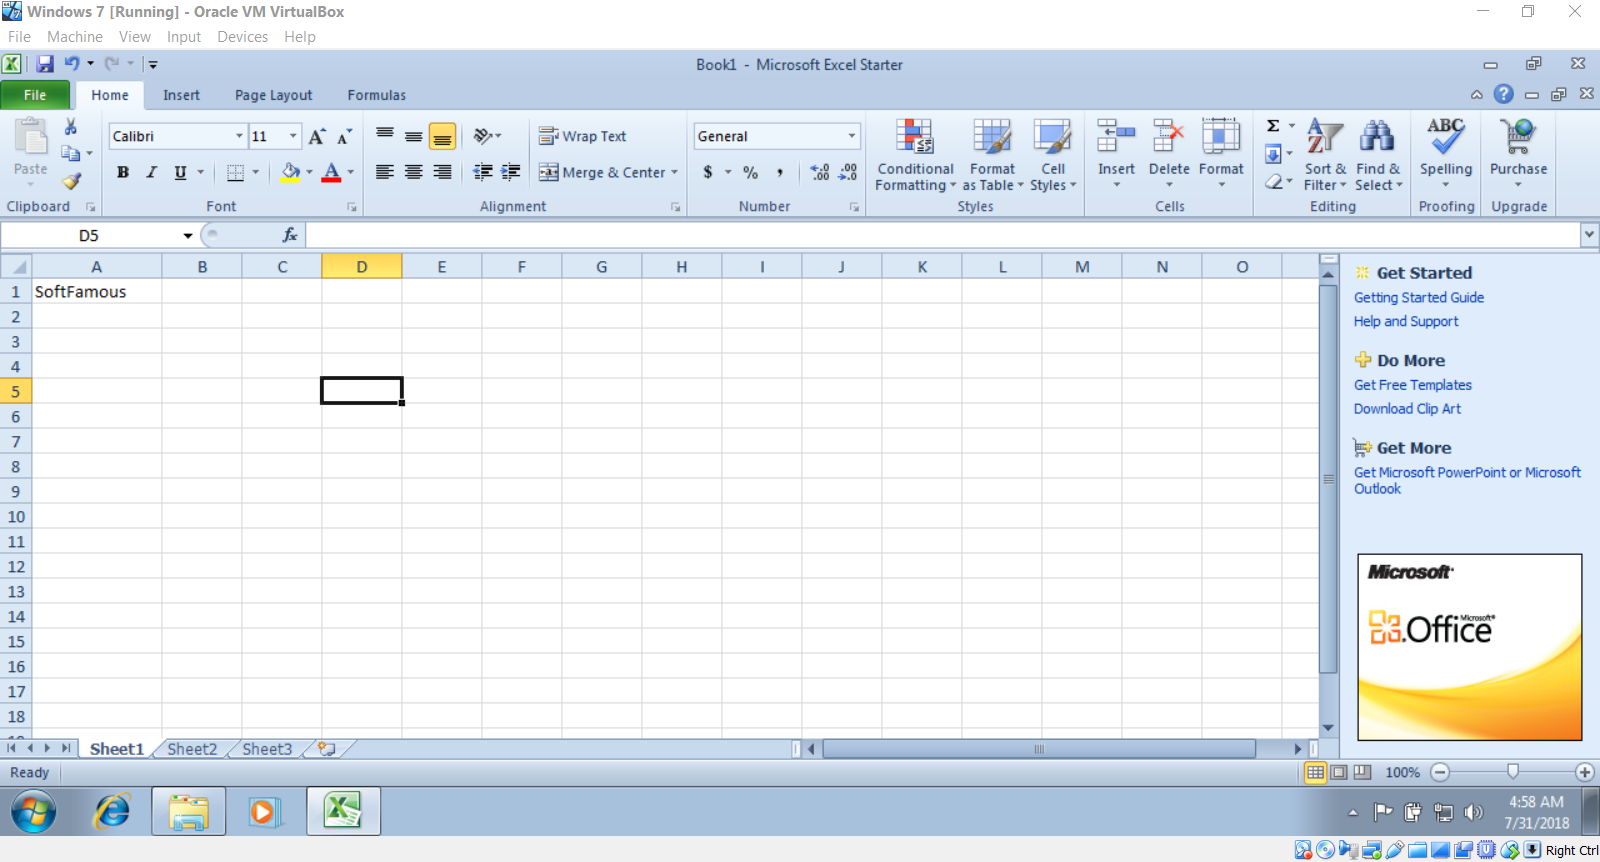 microsoft office excel 2007 free download for windows 7 32 bit